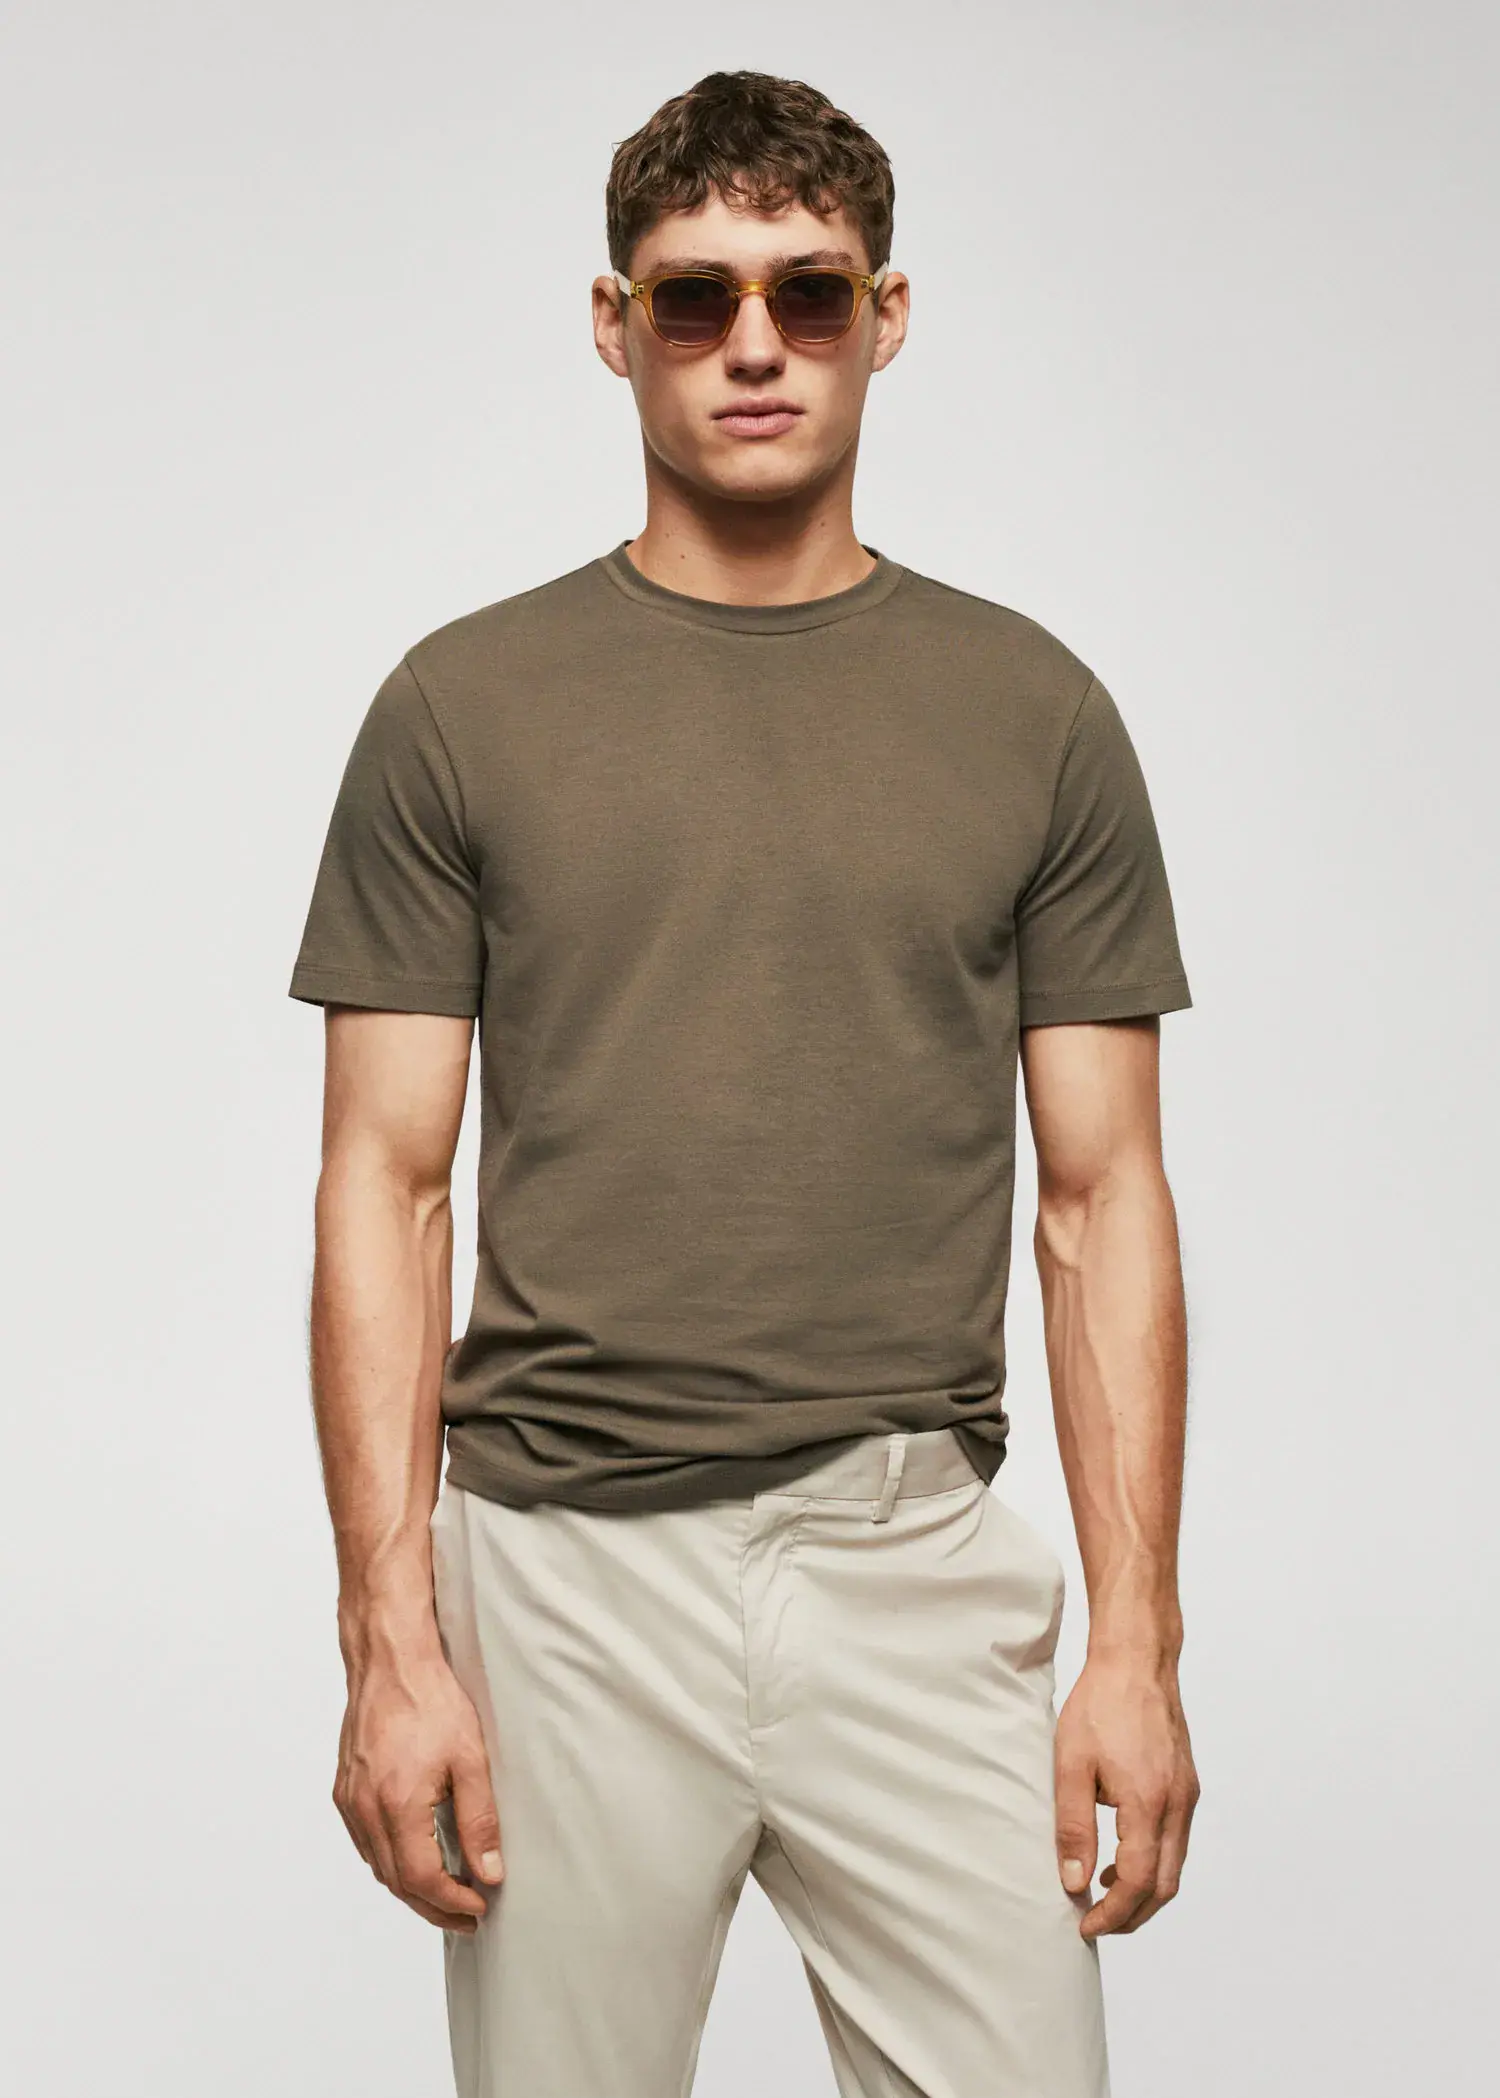 Mango Stretch cotton T-shirt. a man wearing sunglasses standing in front of a white wall. 